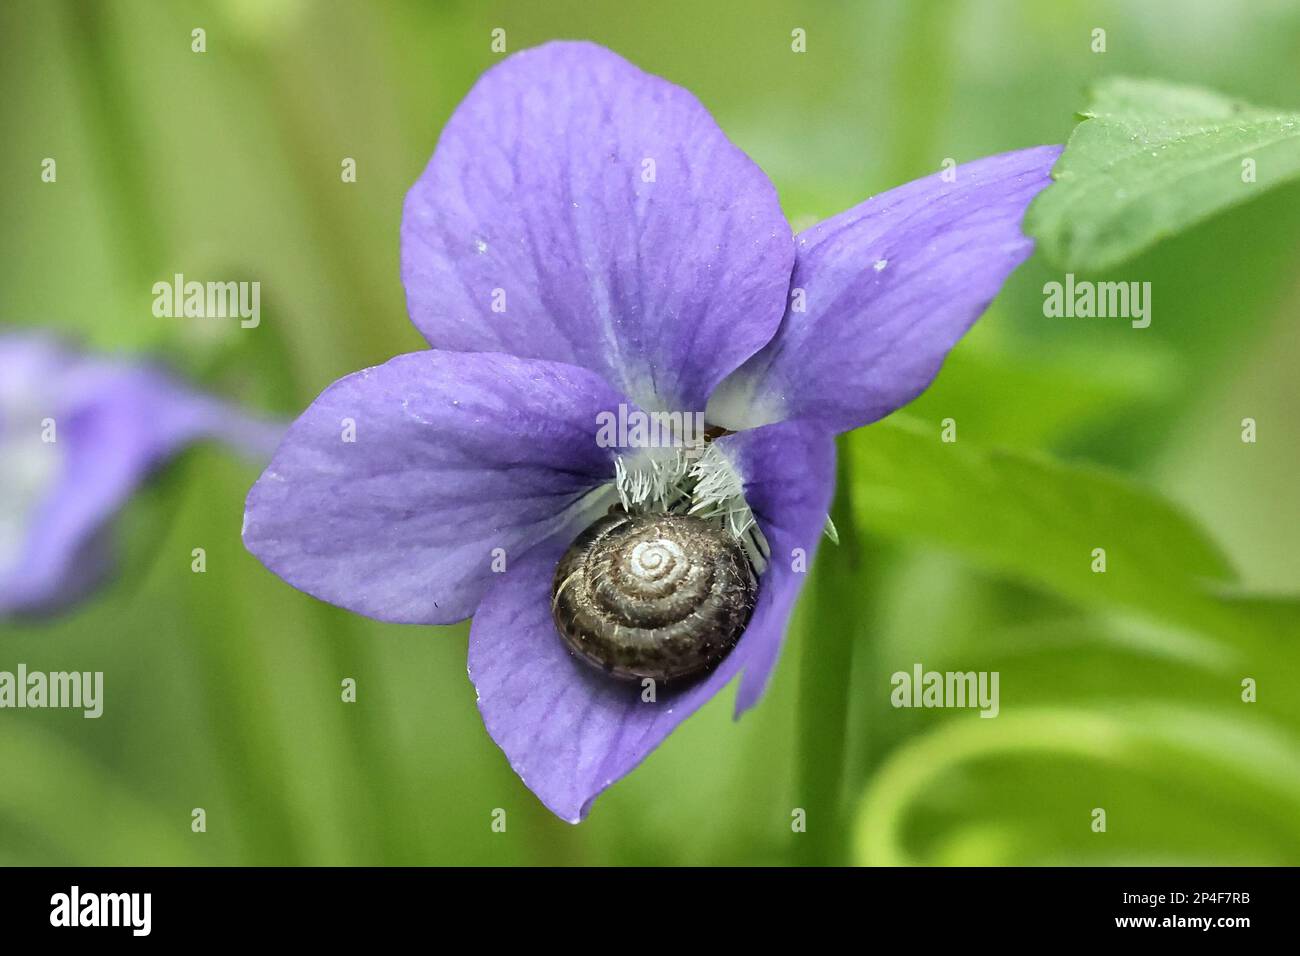 Trochulus hispidus, also called Trichia hispida, commonly known as hairy snail, feeding on heath violet Stock Photo